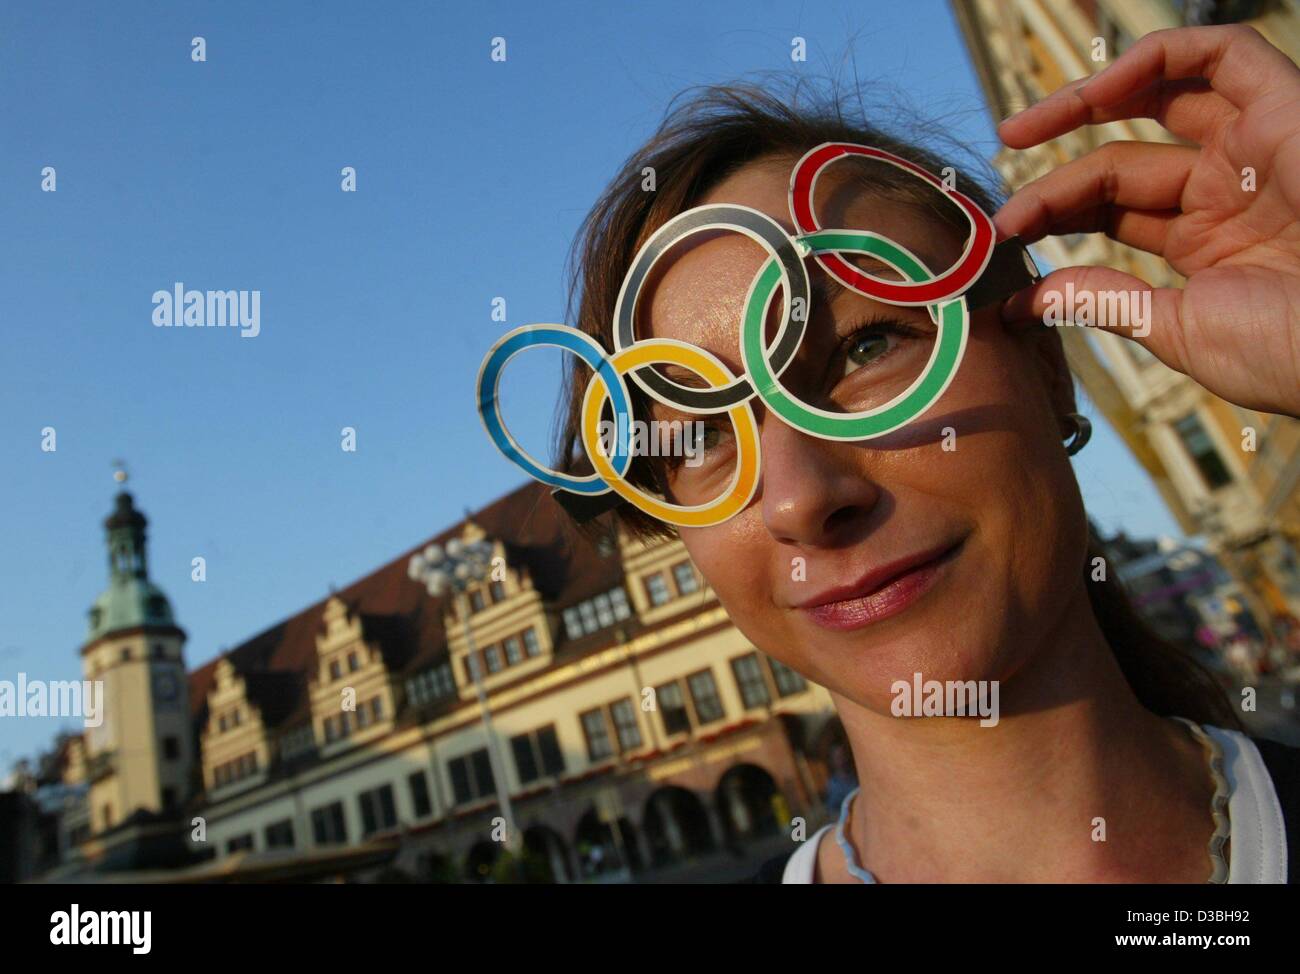 (dpa) - Daniela holds a cutout of the olympic symbole attached to her forehead while she stands in front of the old town hall in Leipzig, Germany, 2 June 2003. The German National Olympic Committee (NOC) selected Leipzig as their candidate for the Olympics 2012; the final decision of the IOC will be Stock Photo